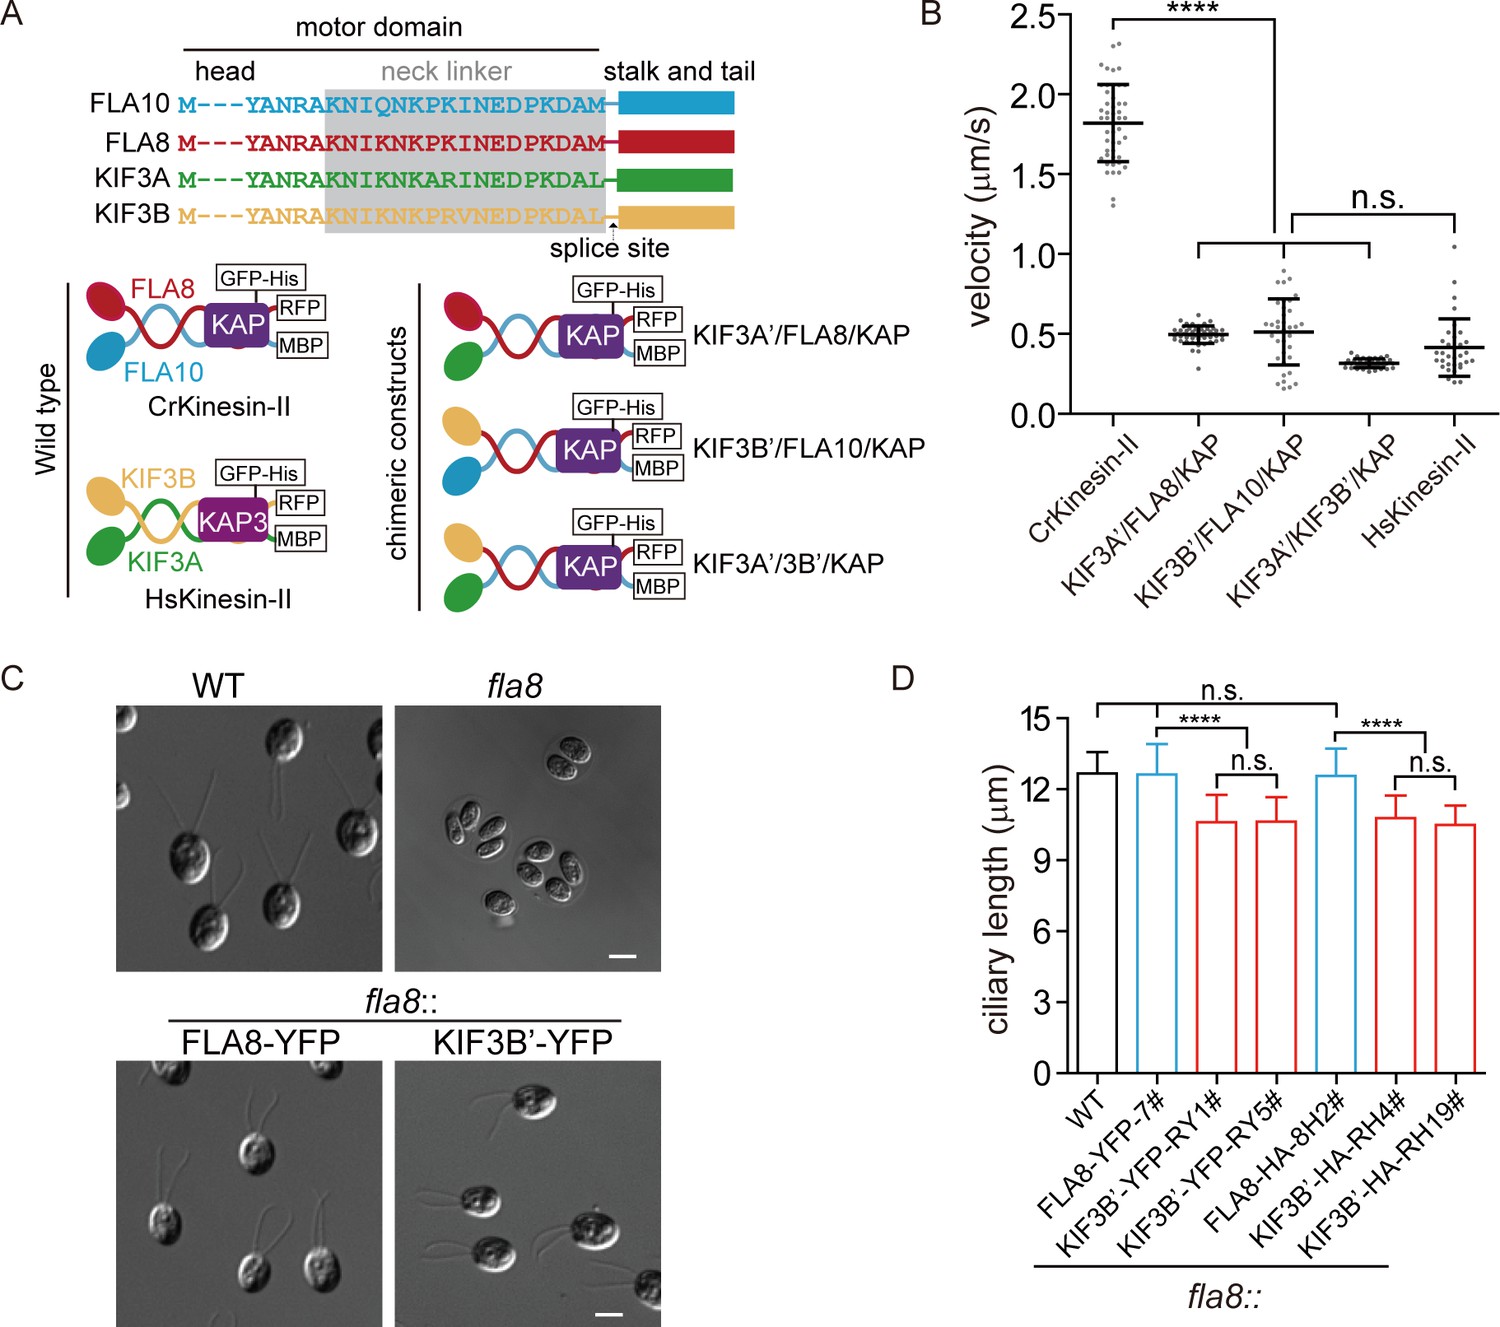 Functional exploration of heterotrimeric kinesin-II in IFT and ciliary length in Chlamydomonas